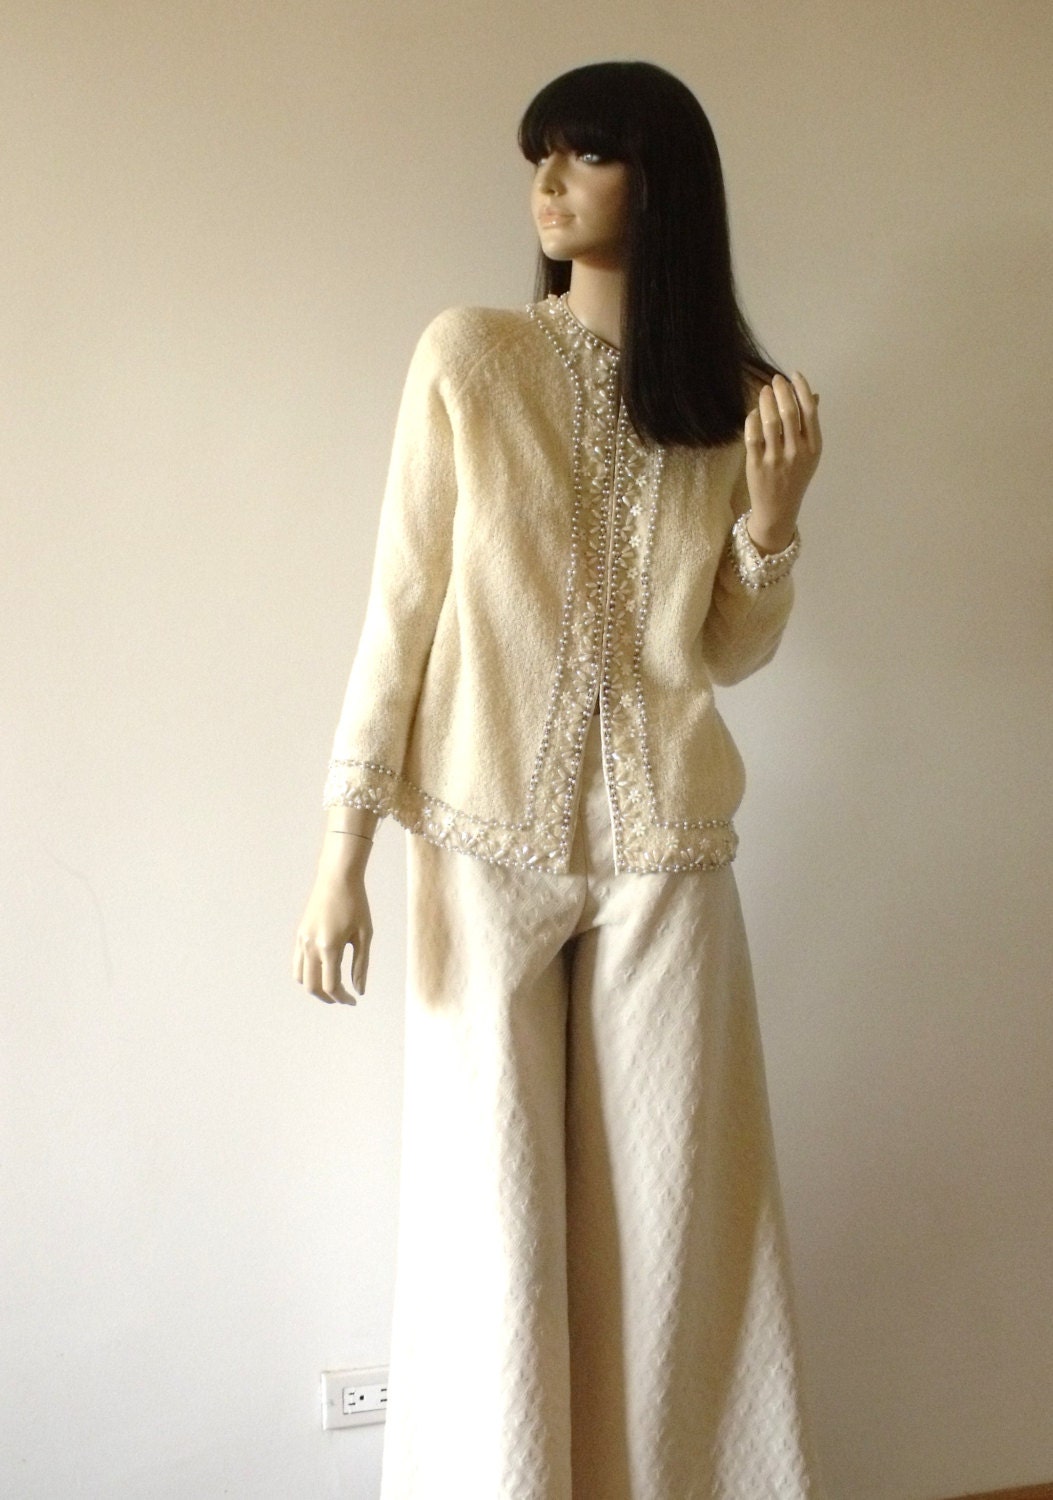 Wool Sweater with Pearls and Ecru Beading British Hong Kong 1960s Wedding